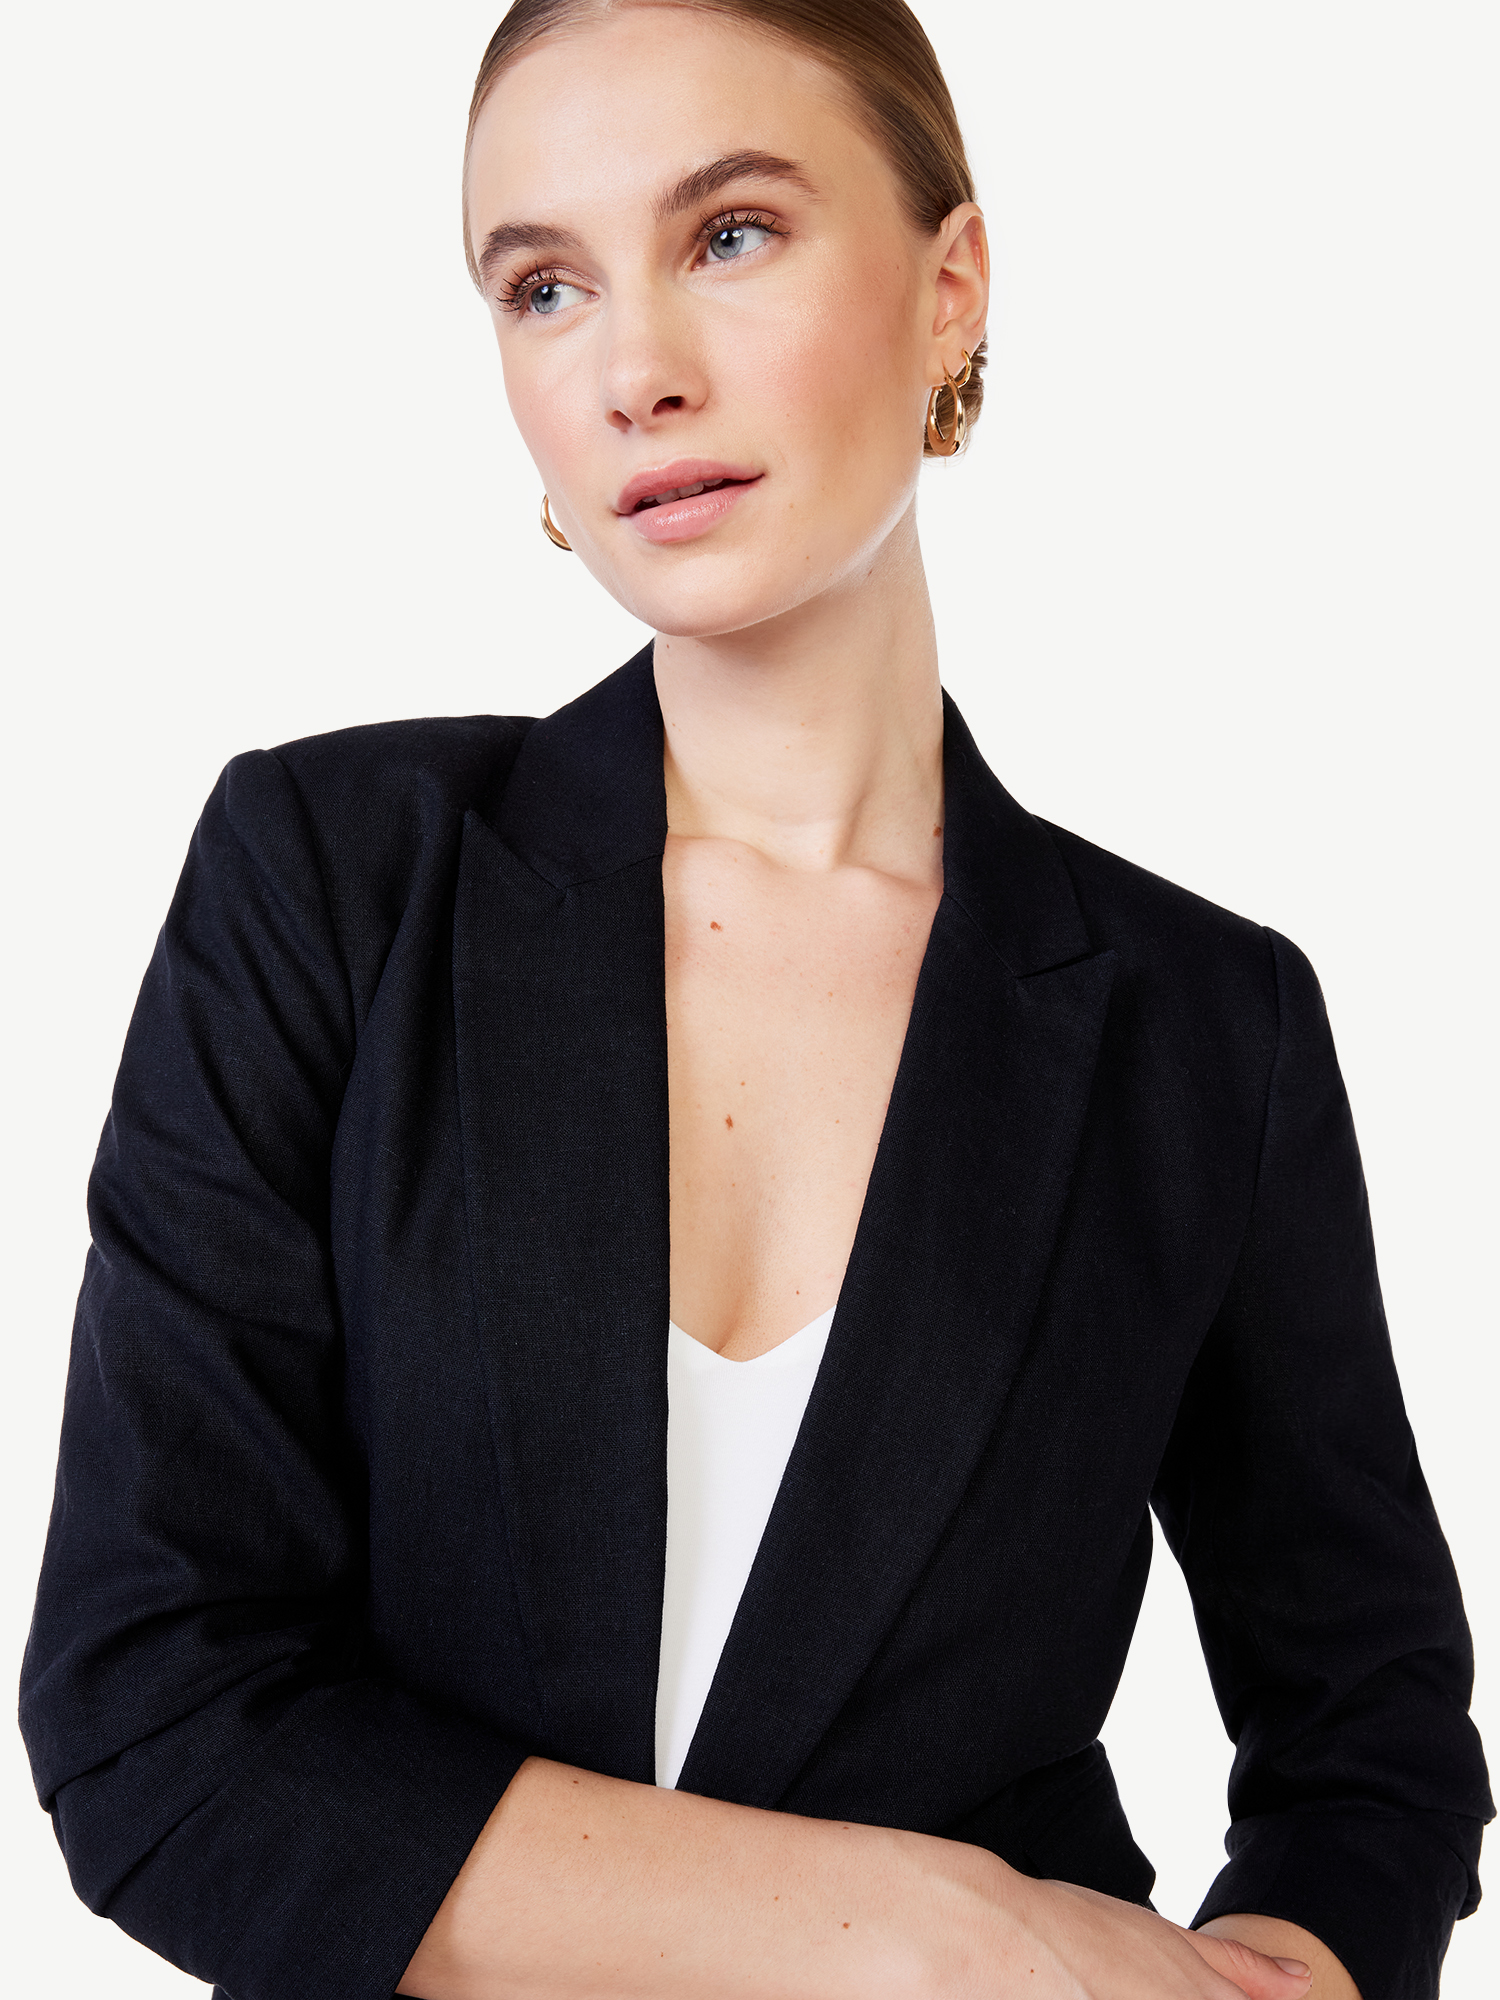 Scoop Women's Linen-Blend Open Front Blazer with Tie Back and 3/4 Scrunch Sleeves - image 5 of 5